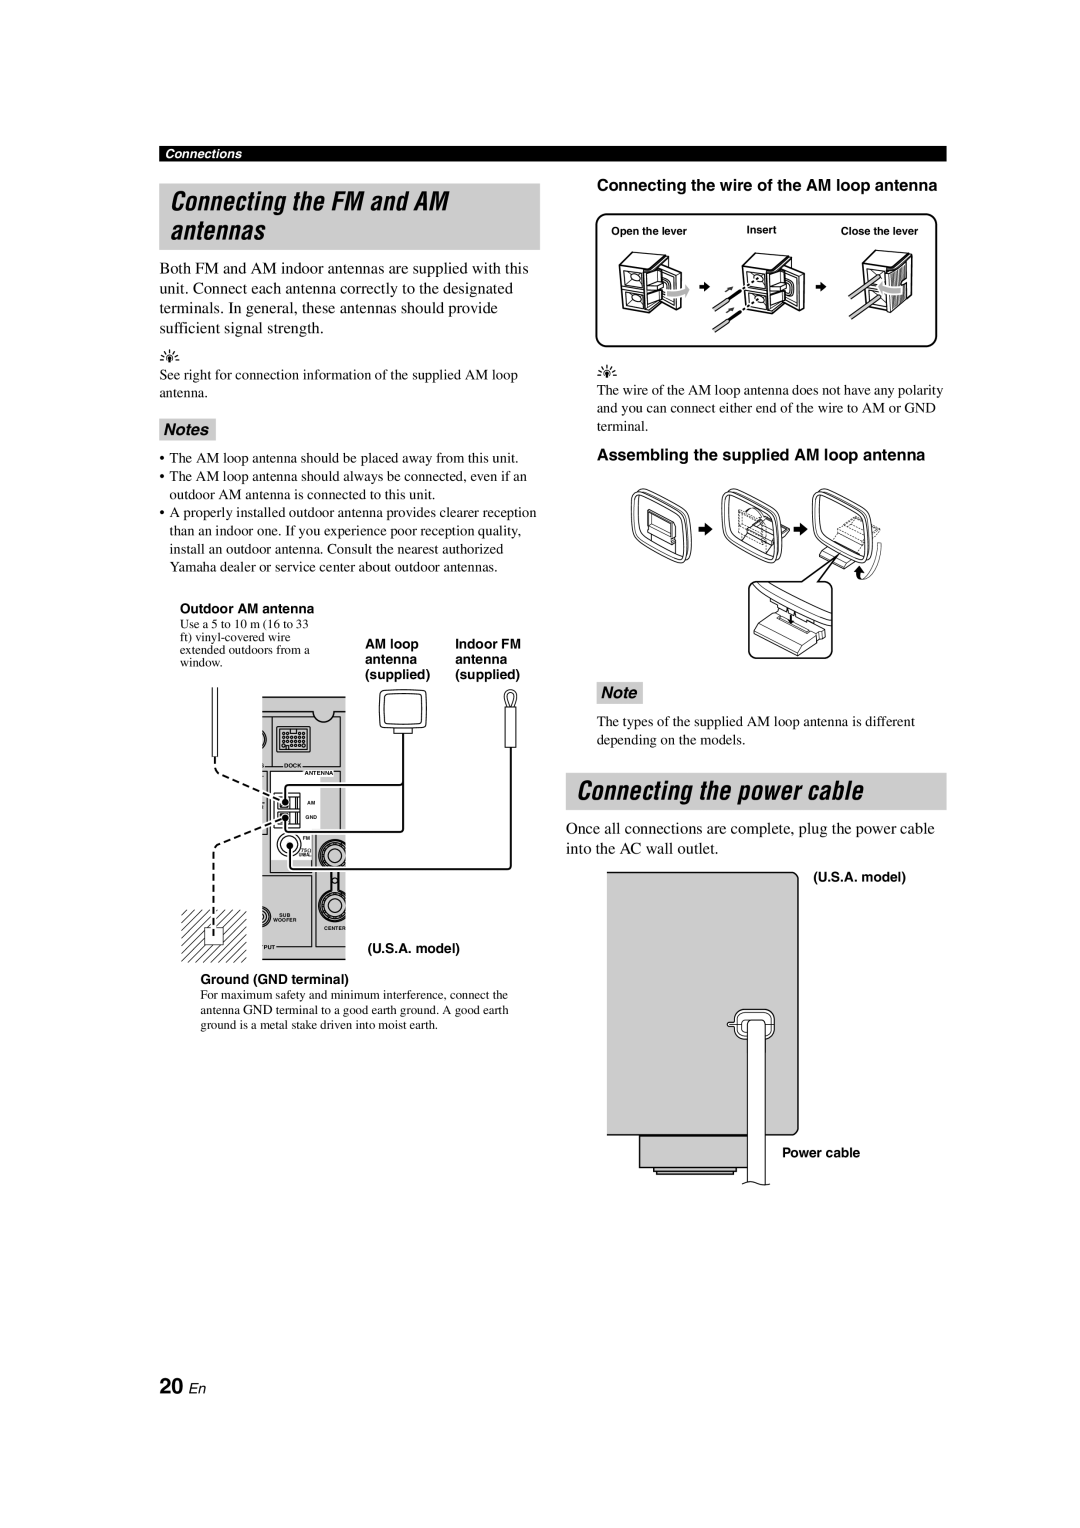 Yamaha RX-V463 owner manual Connecting the FM and AM antennas, Connecting the power cable, 20 En, Notes 